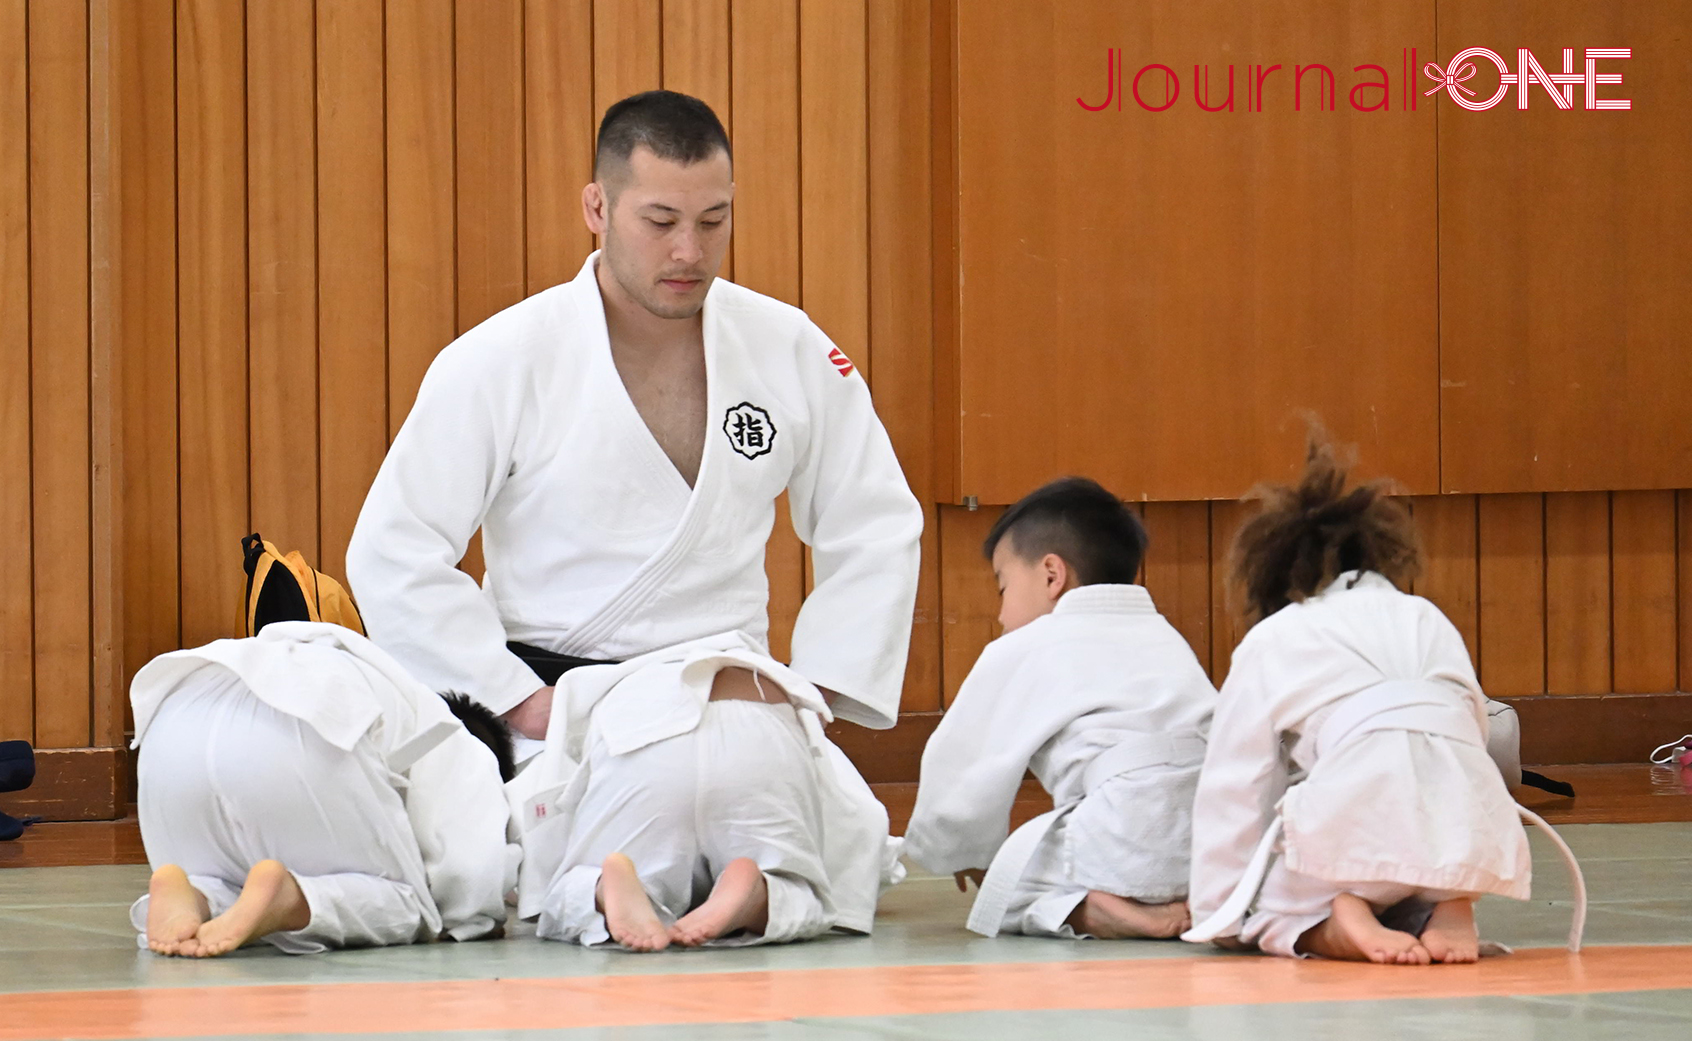 Children studying at  the Kodokan Institute, the headquarter of Judo - photo by Journal-ONE